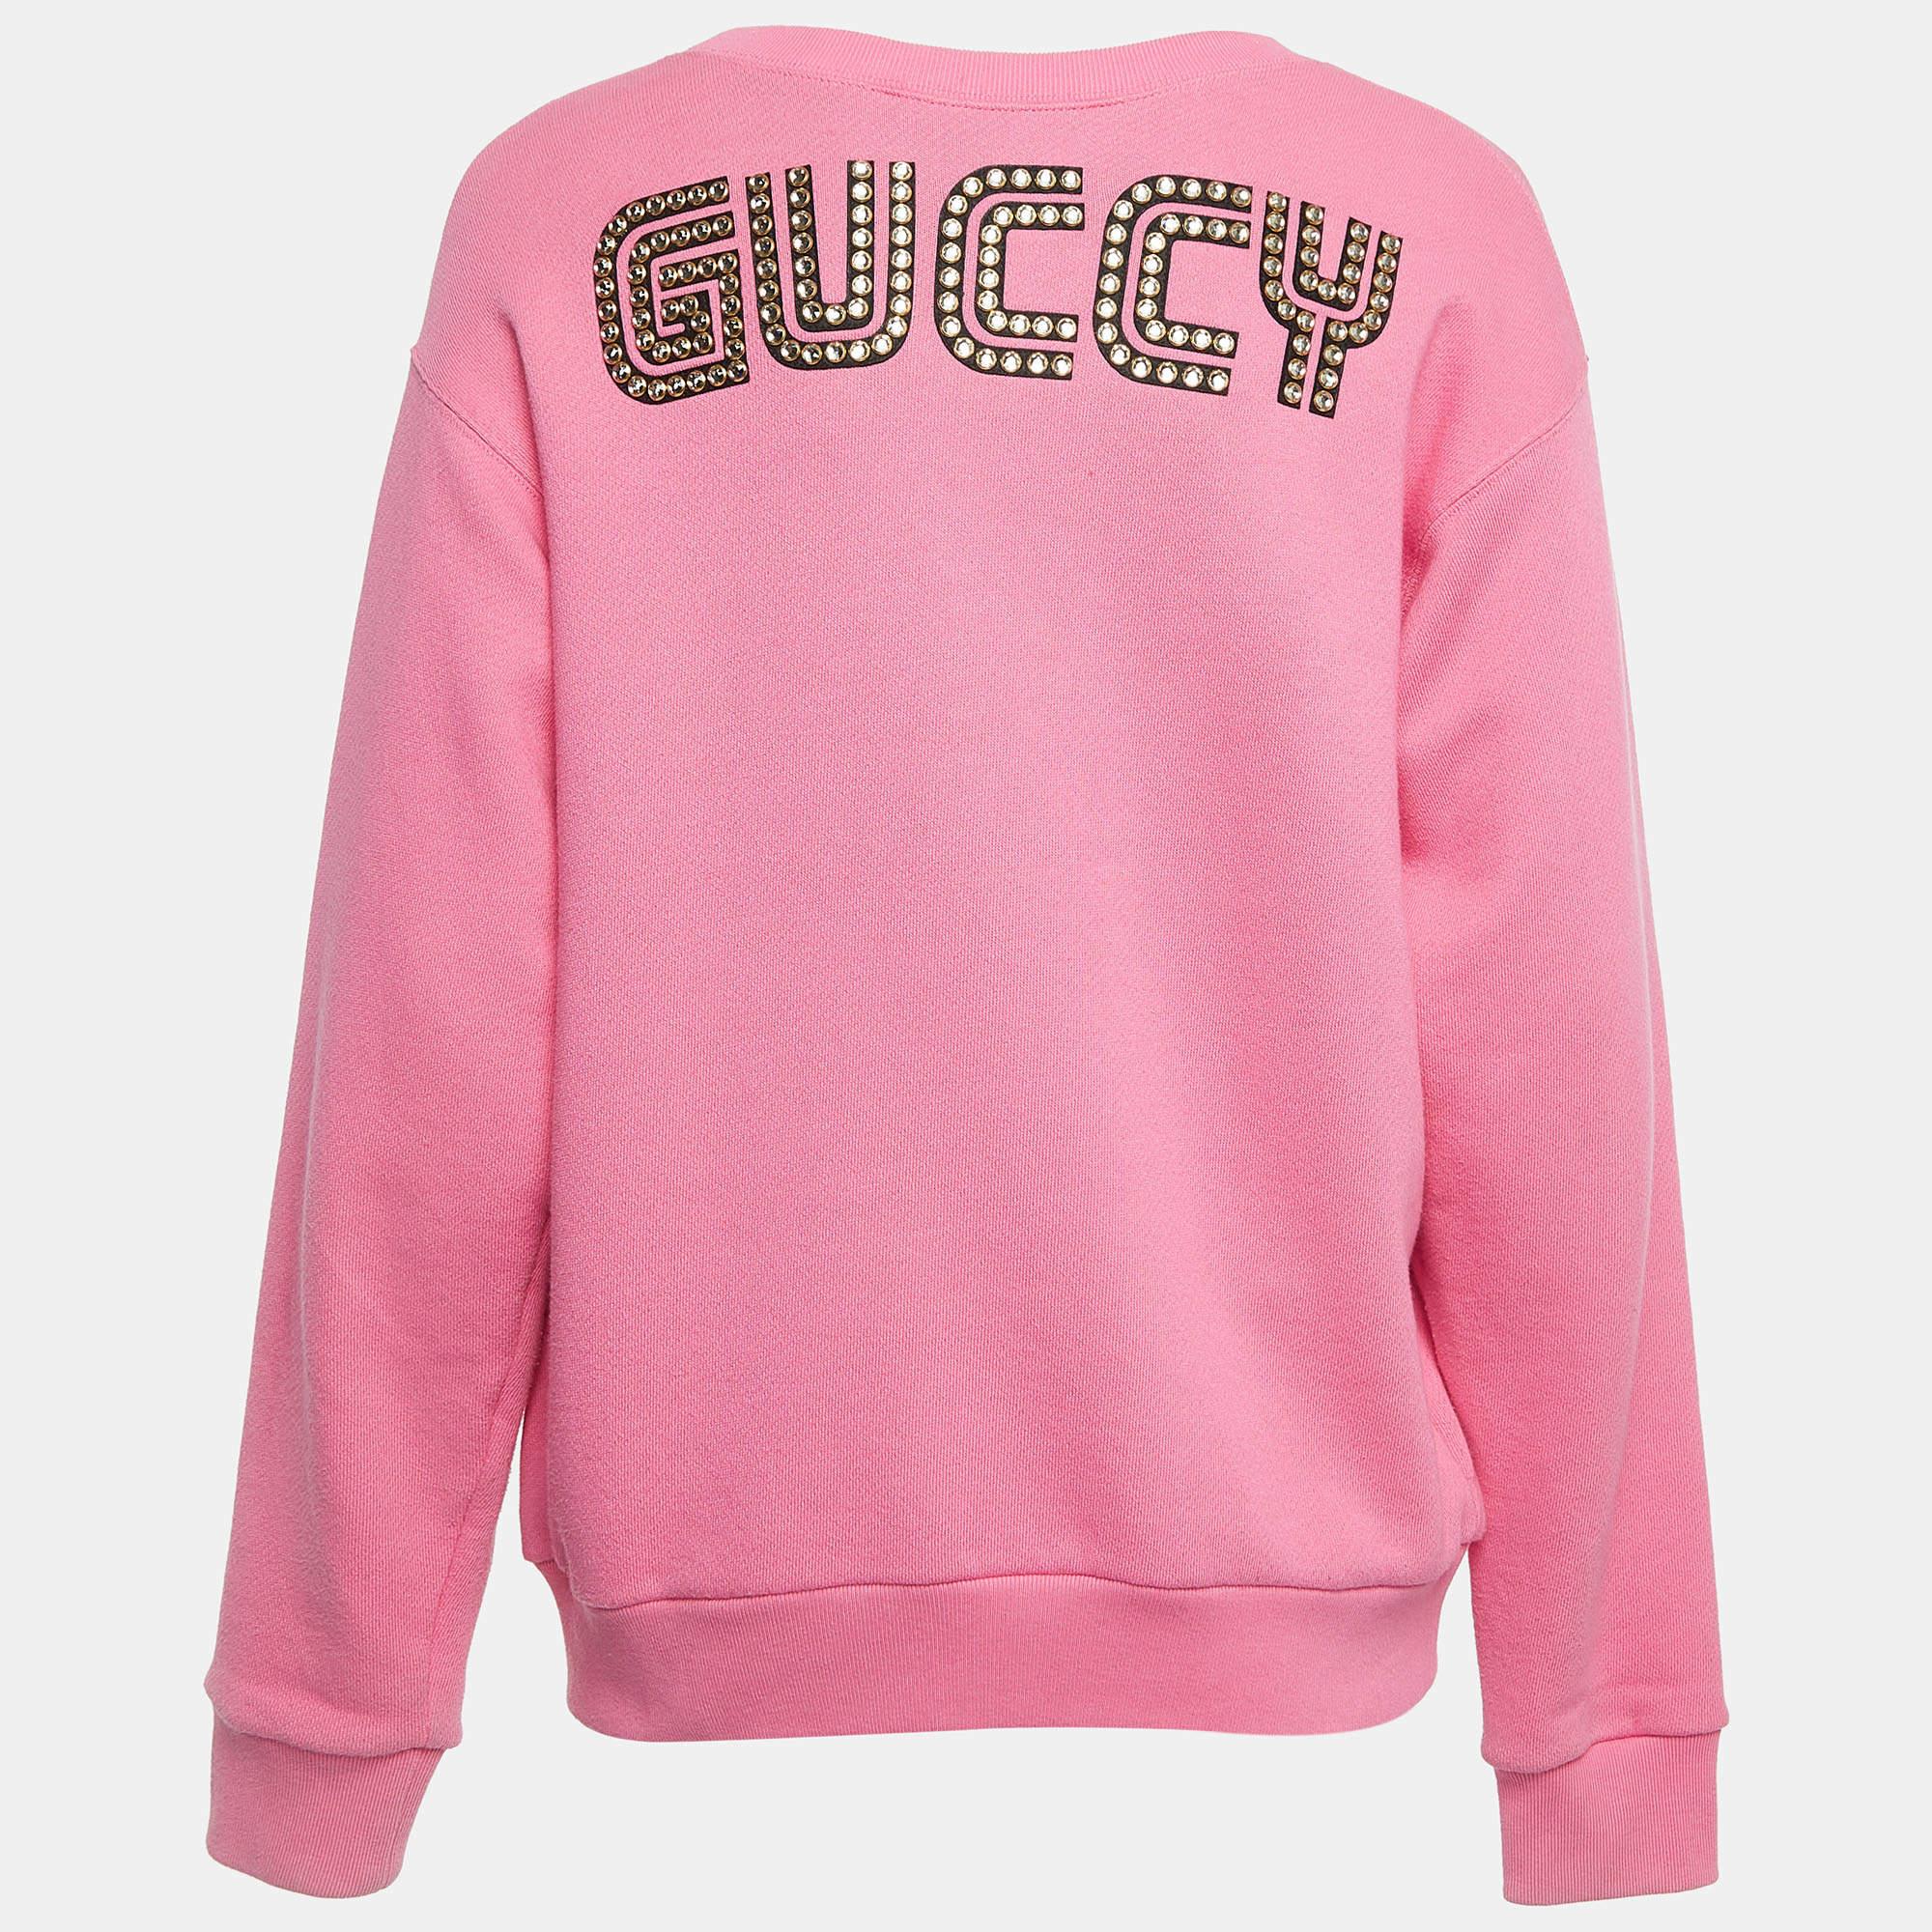 Discover the epitome of cozy chic with this Gucci women's sweatshirt. Crafted for both warmth and style, it combines comfort with fashion-forward detailing, making it your go-to choice for casual sophistication.

